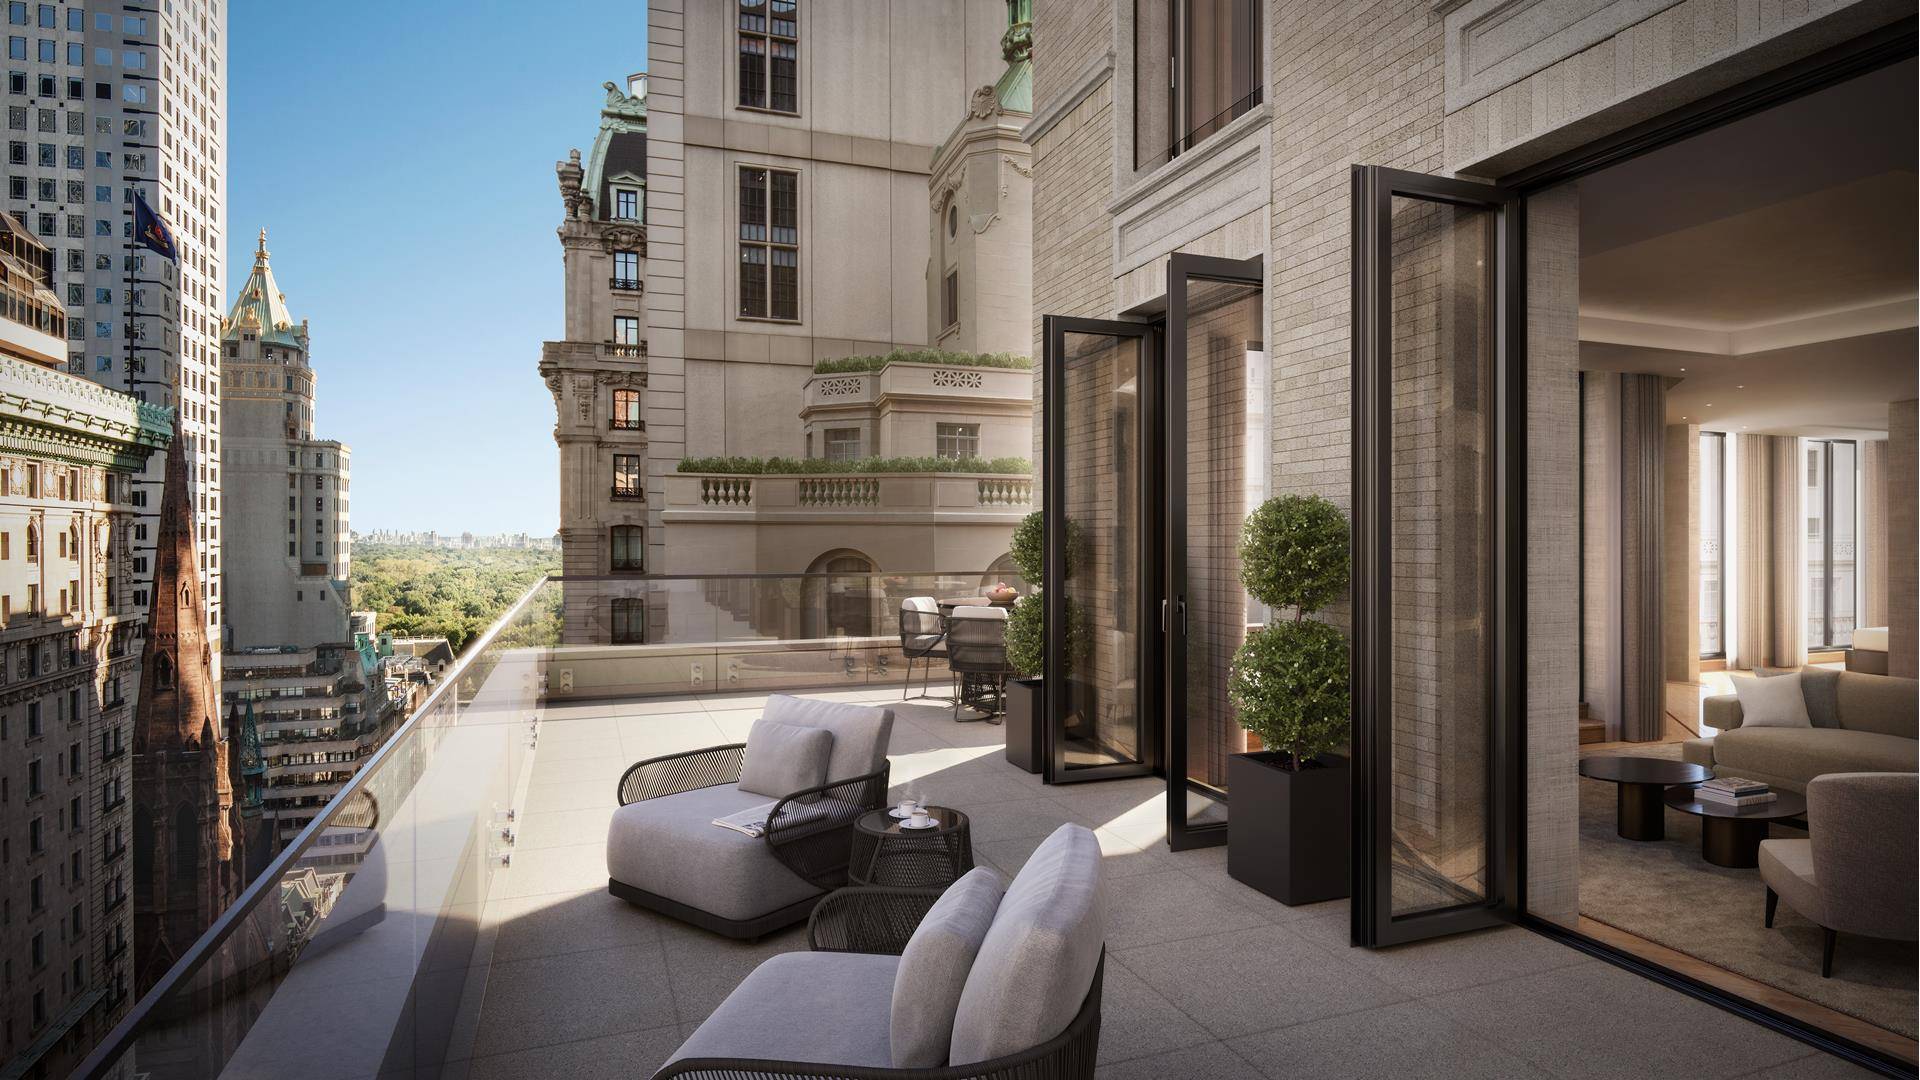 Introducing Mandarin Oriental Residences, located on Fifth Avenue, just steps away from Central Park.